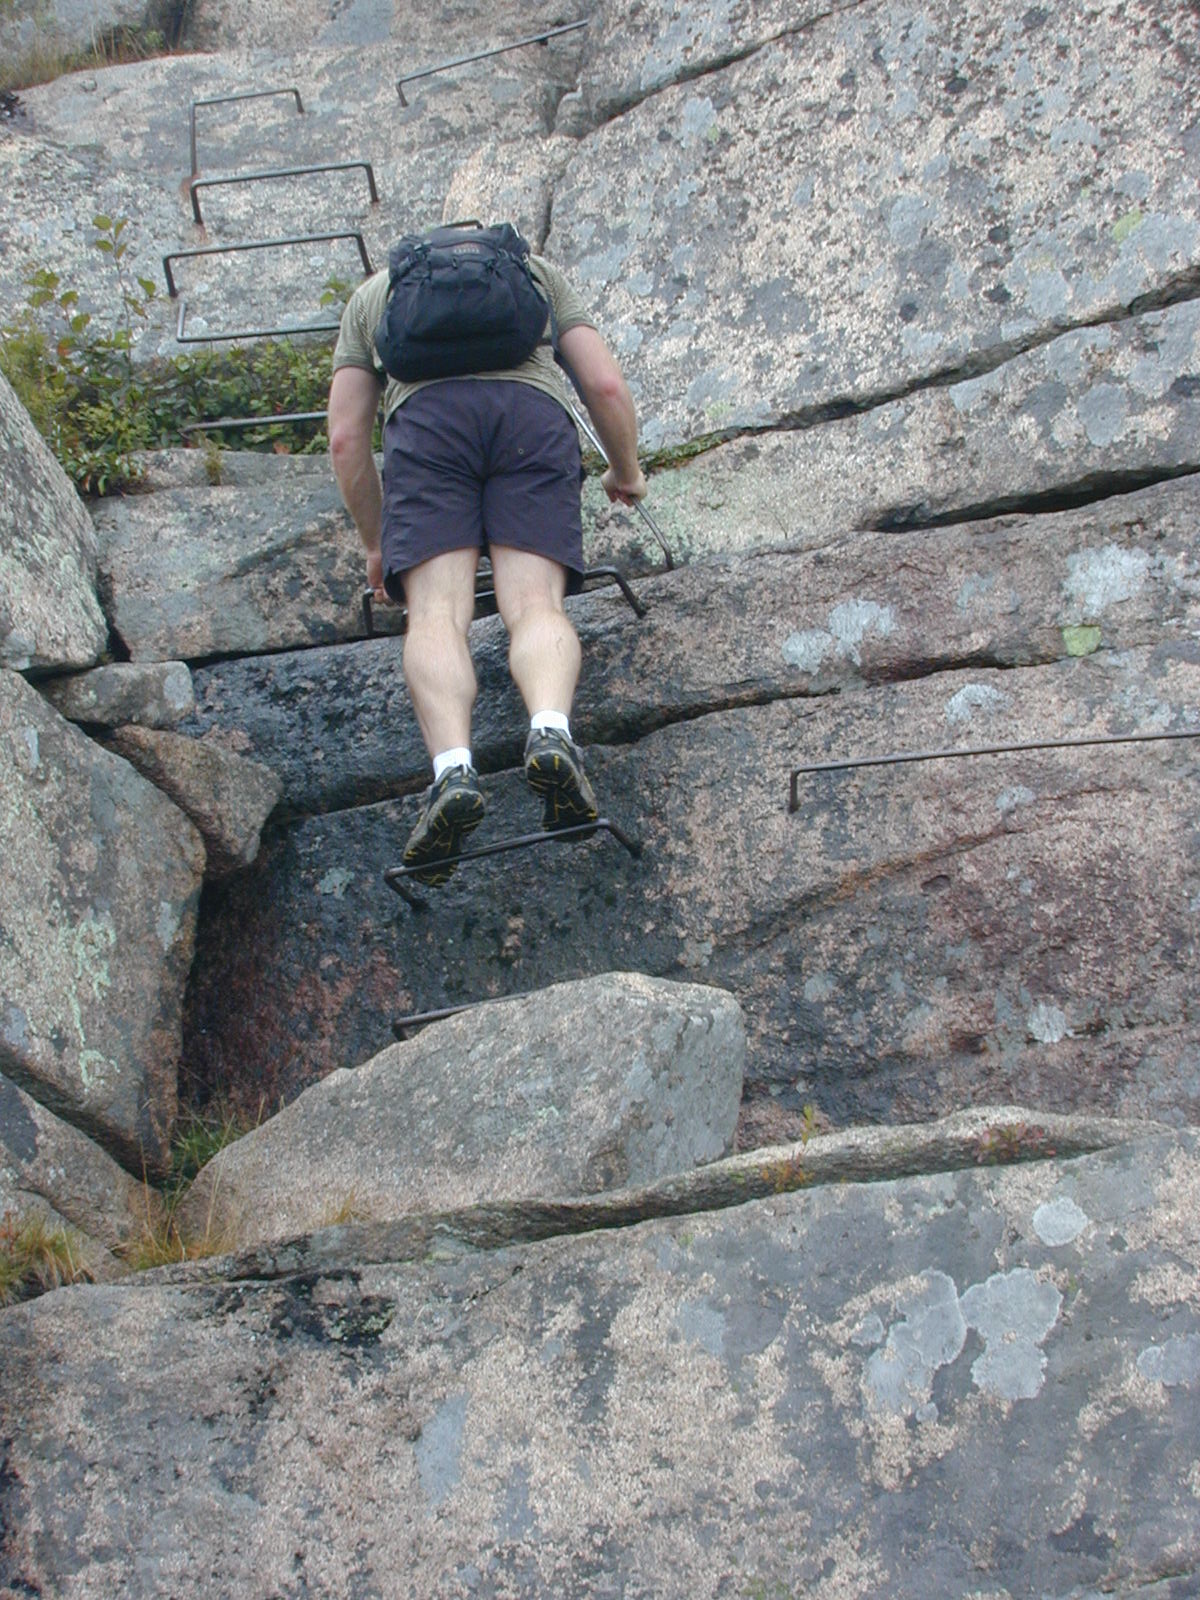 a man is climbing over the rocks wearing shorts and a backpack